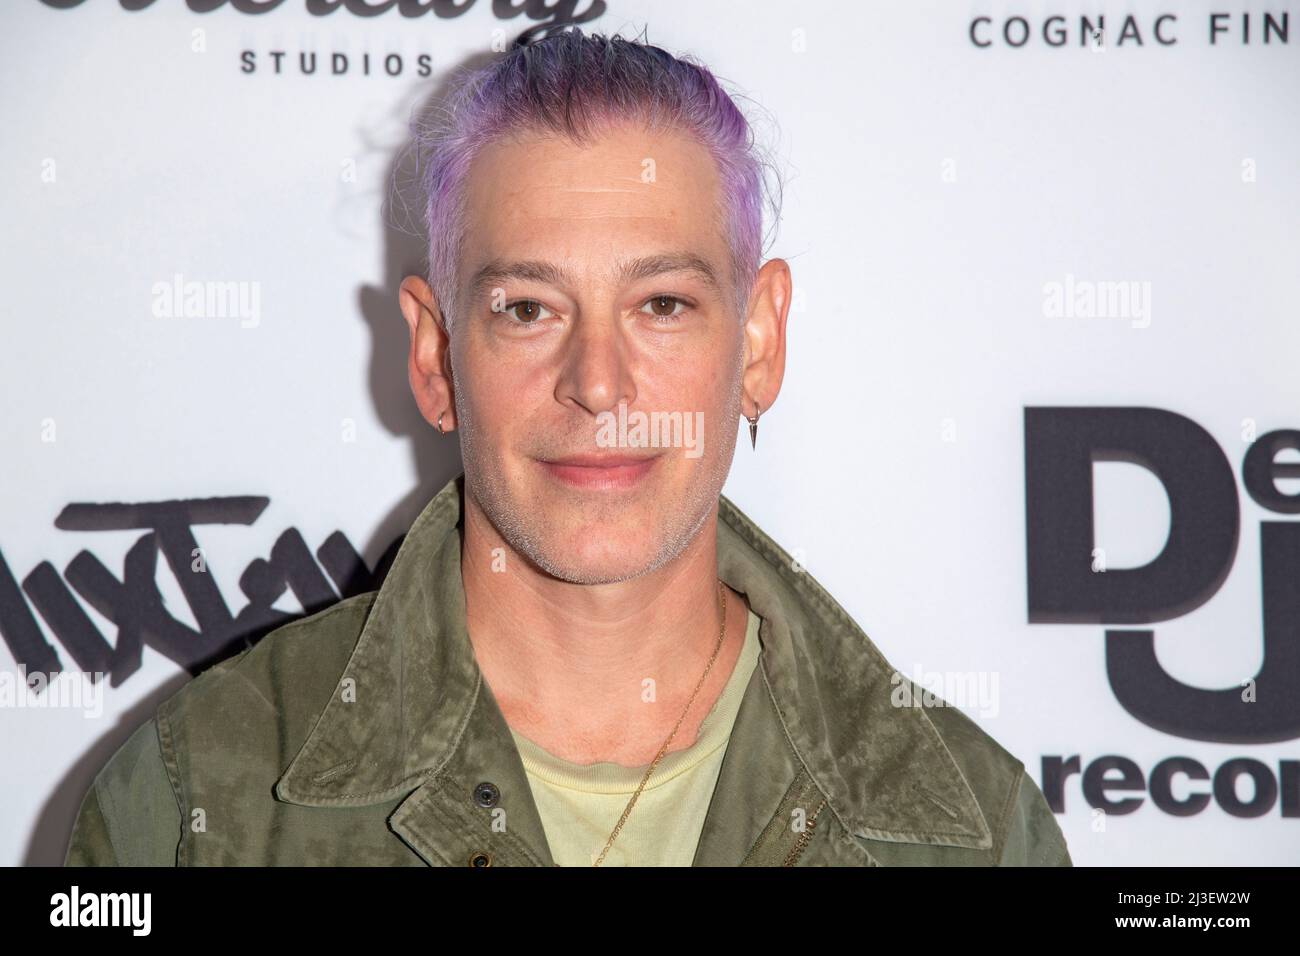 NEW YORK, NEW YORK - APRIL 07: Matisyahu attends the world premiere of 'Mixtape' at United Palace Theater on April 07, 2022 in New York City. Credit: Ron Adar/Alamy Live News Stock Photo